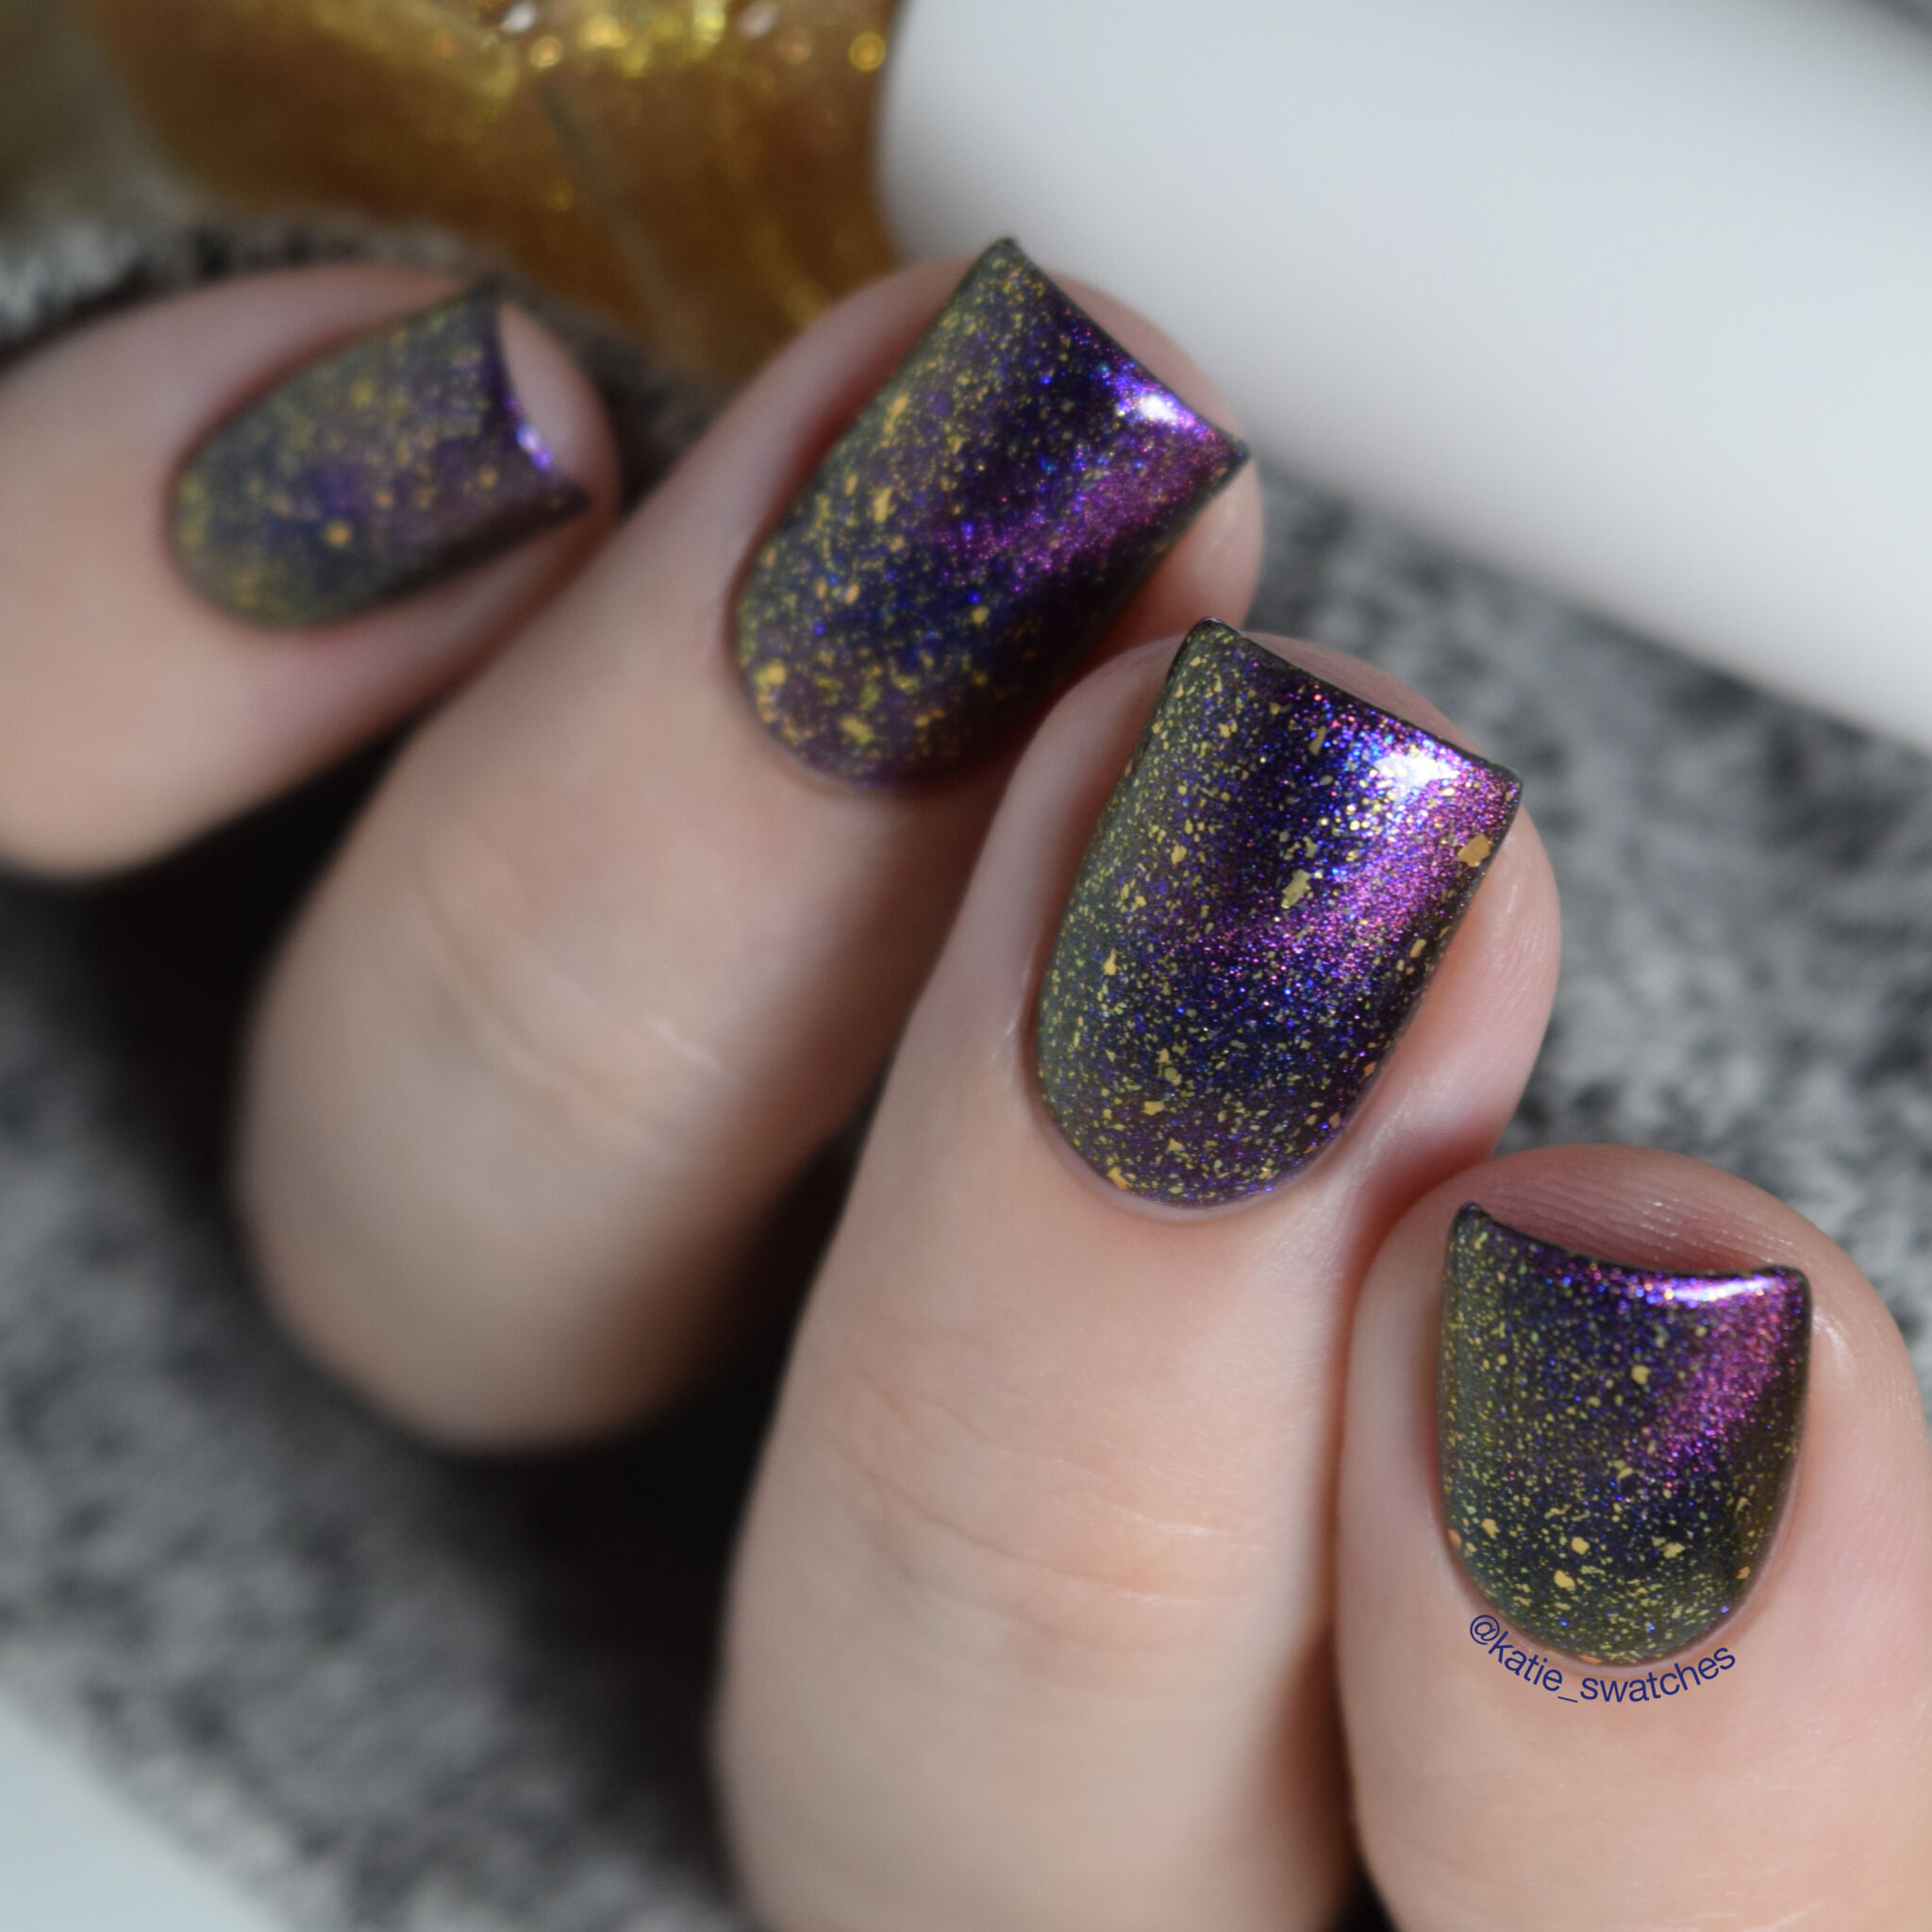 Cuticula Wonderstruck gold flake top coat layered over Polished for Days Started With A Mouse magnetic nail polish swatch - Polish Pickup February 2019 Duos & Pairs Collection